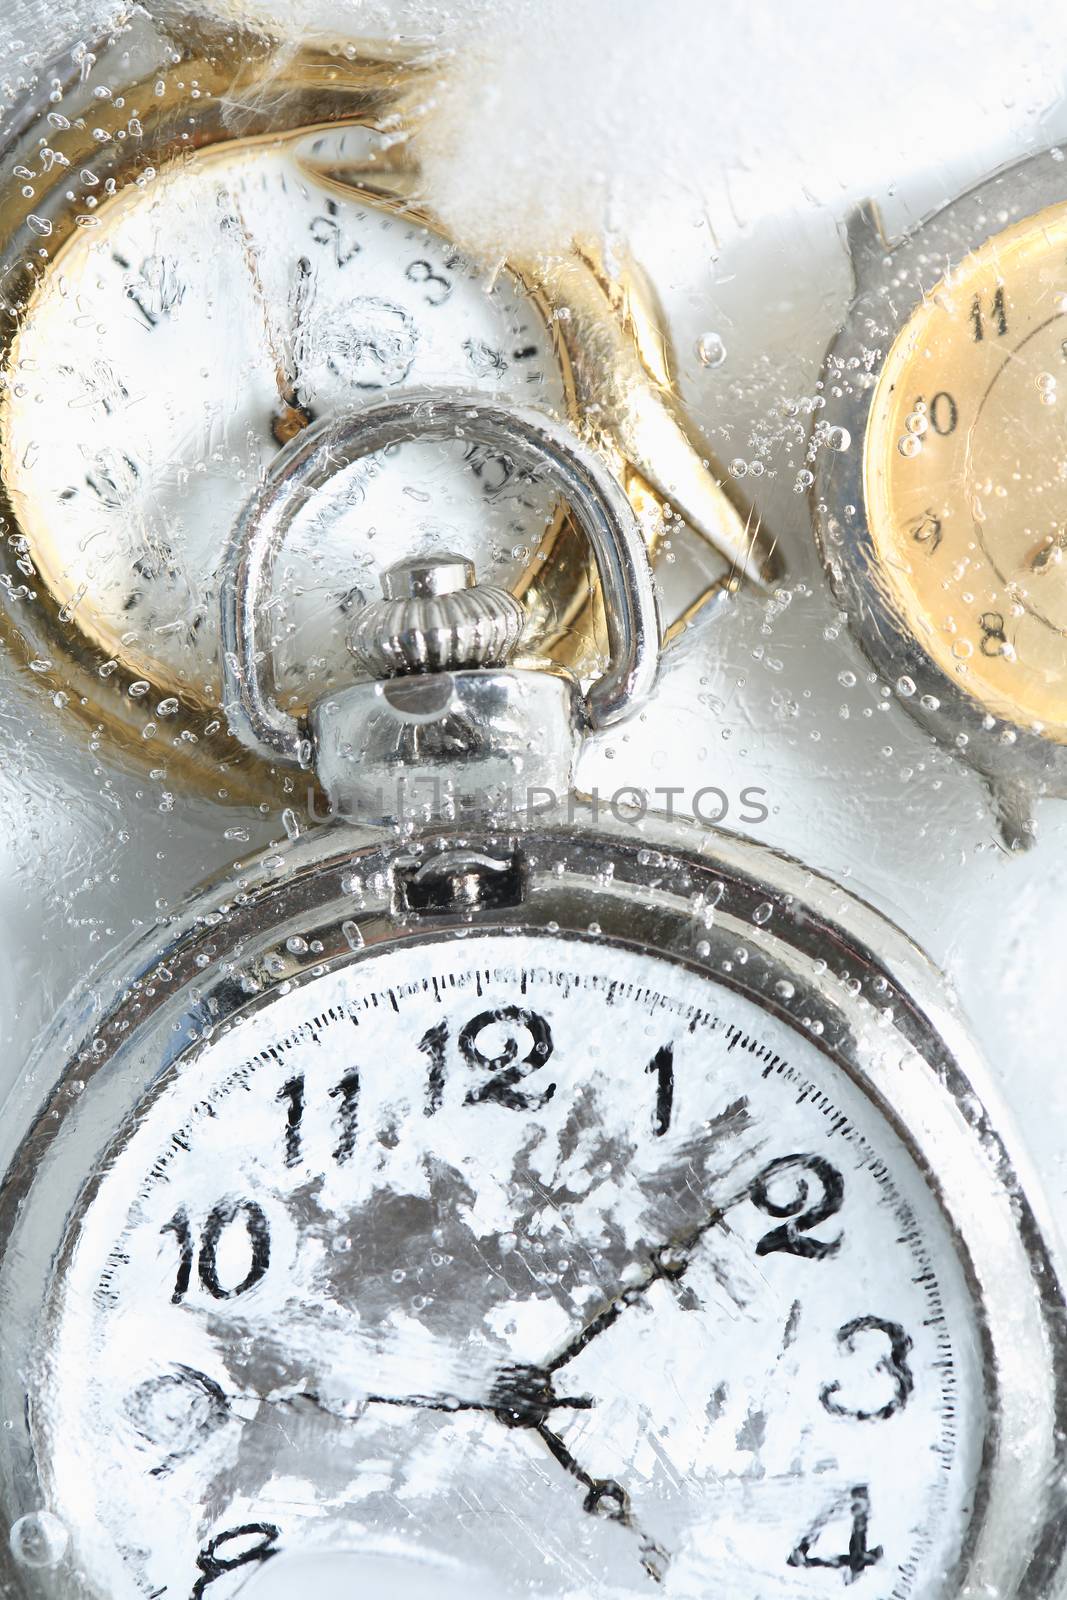 Permafrost concept. Closeup of pocket watch under frozen water surface with ice